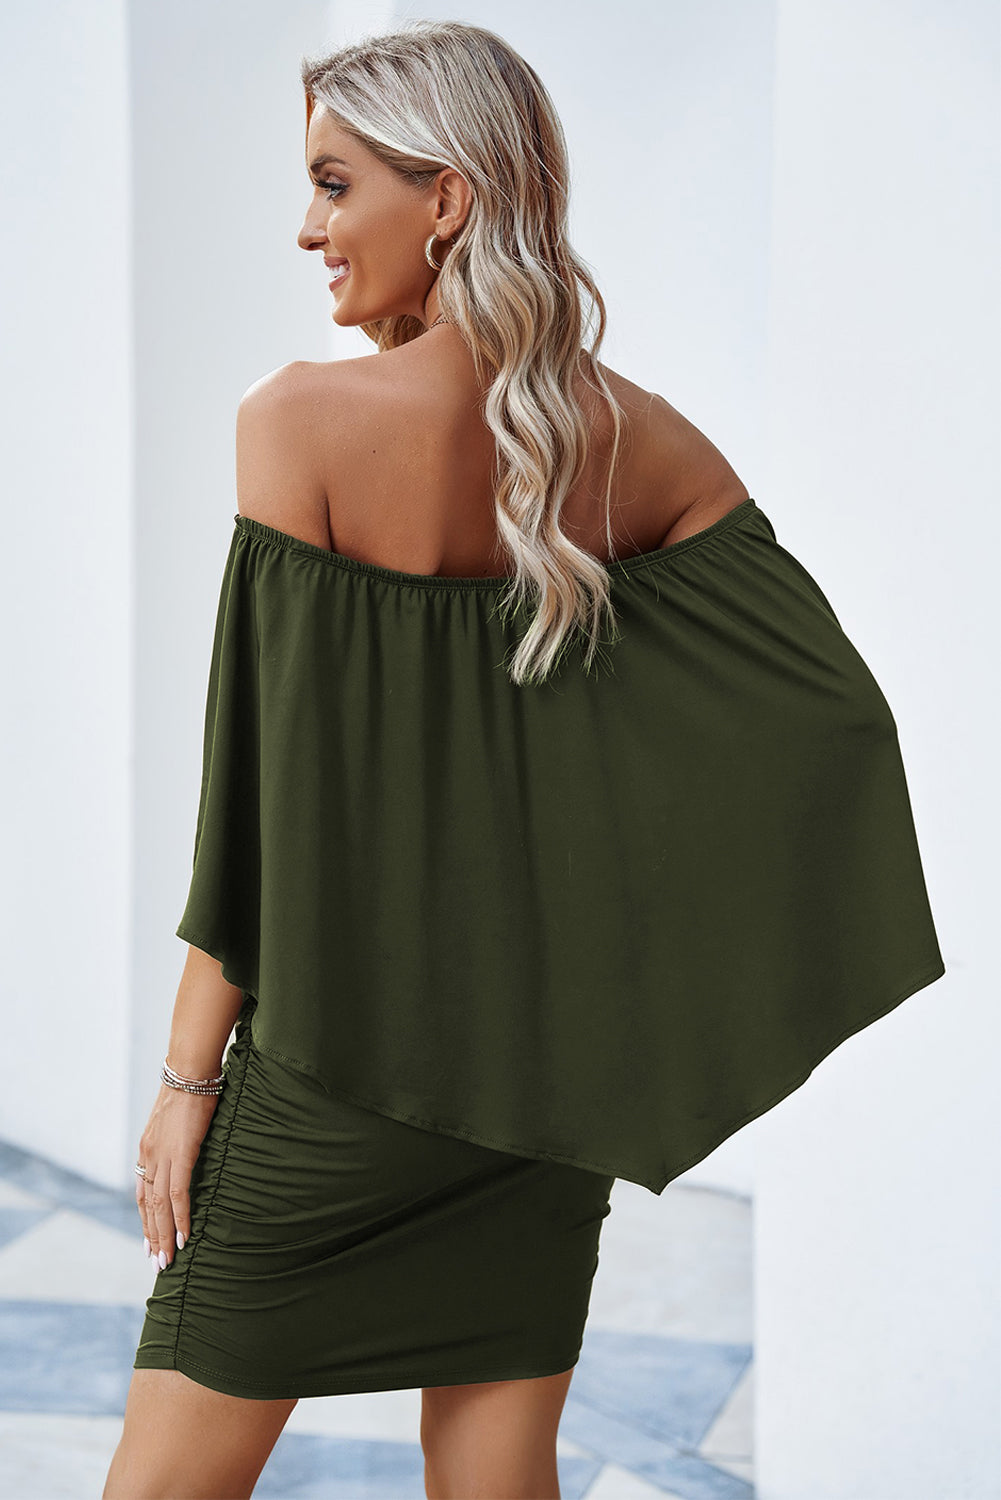 Chic Off-Shoulder Dress - The Exclusive Emerald